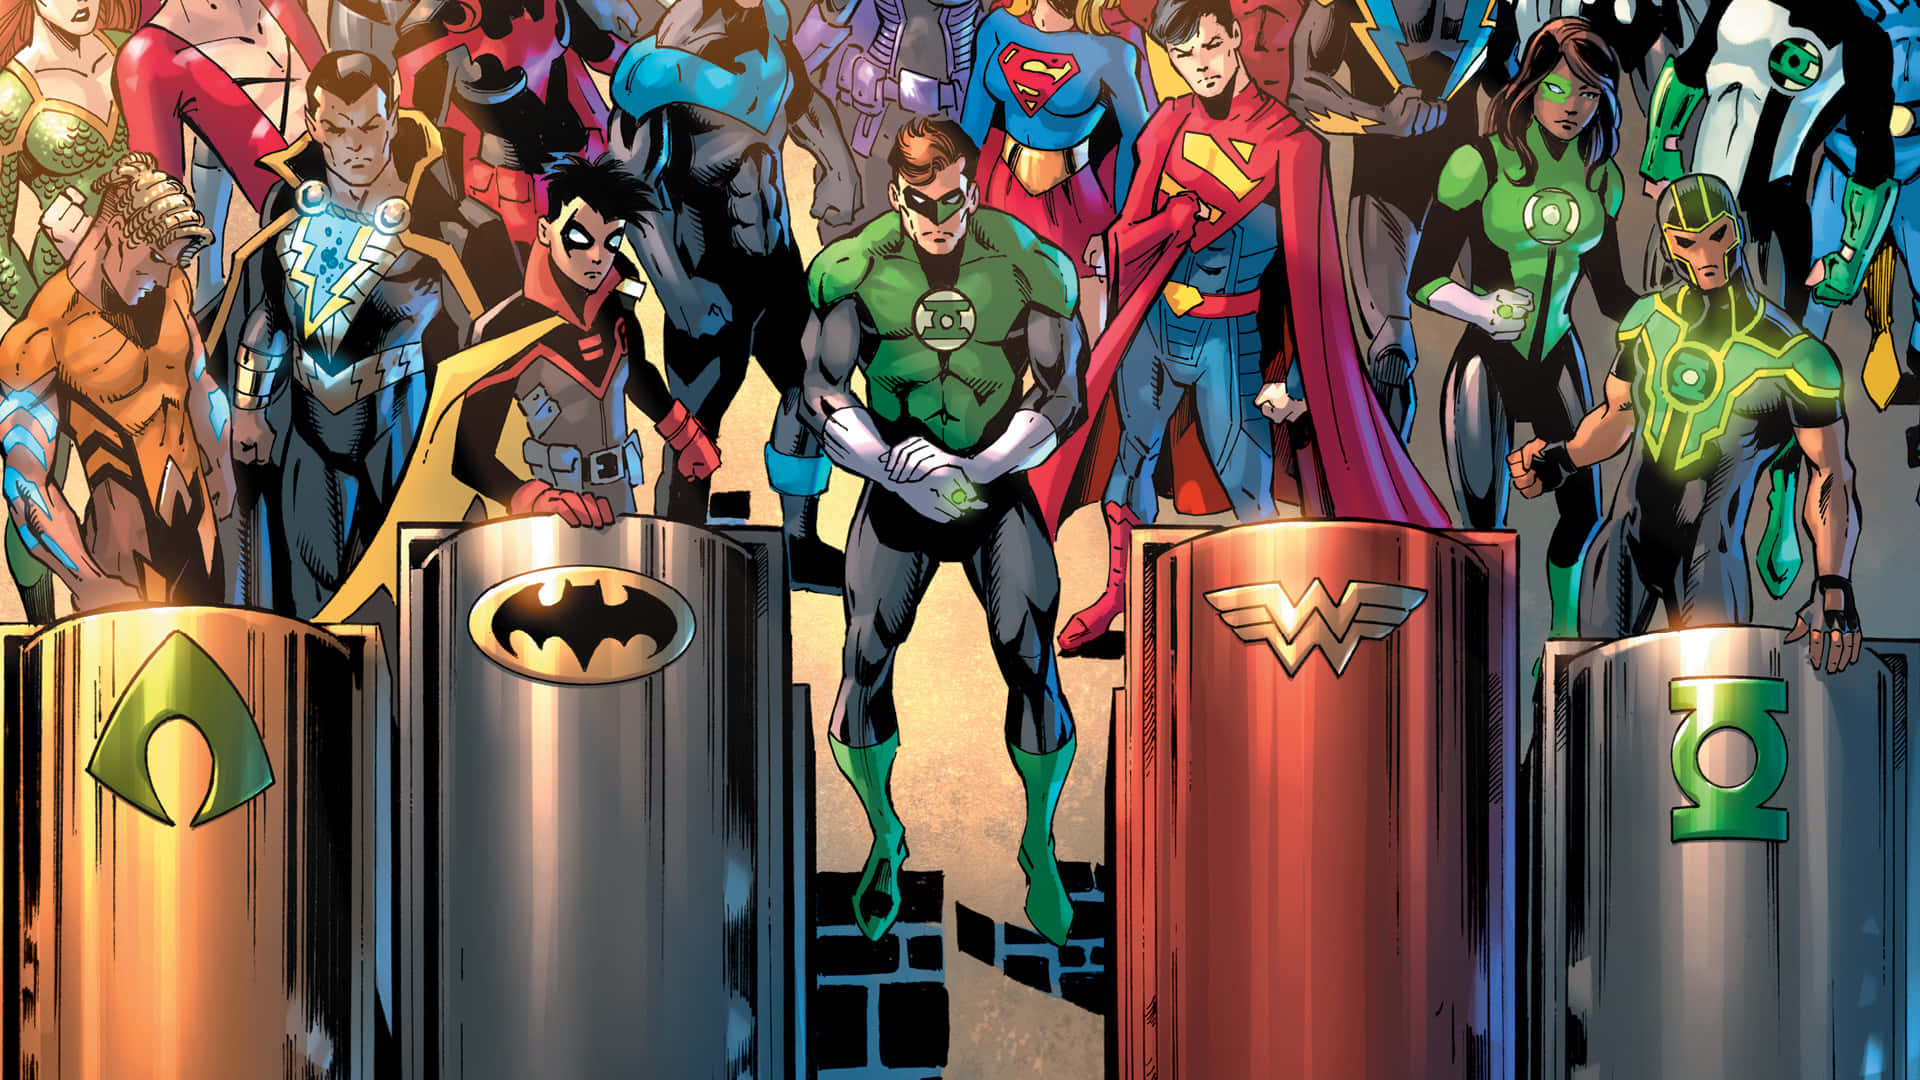 Get Ready For The Action - DC Comics